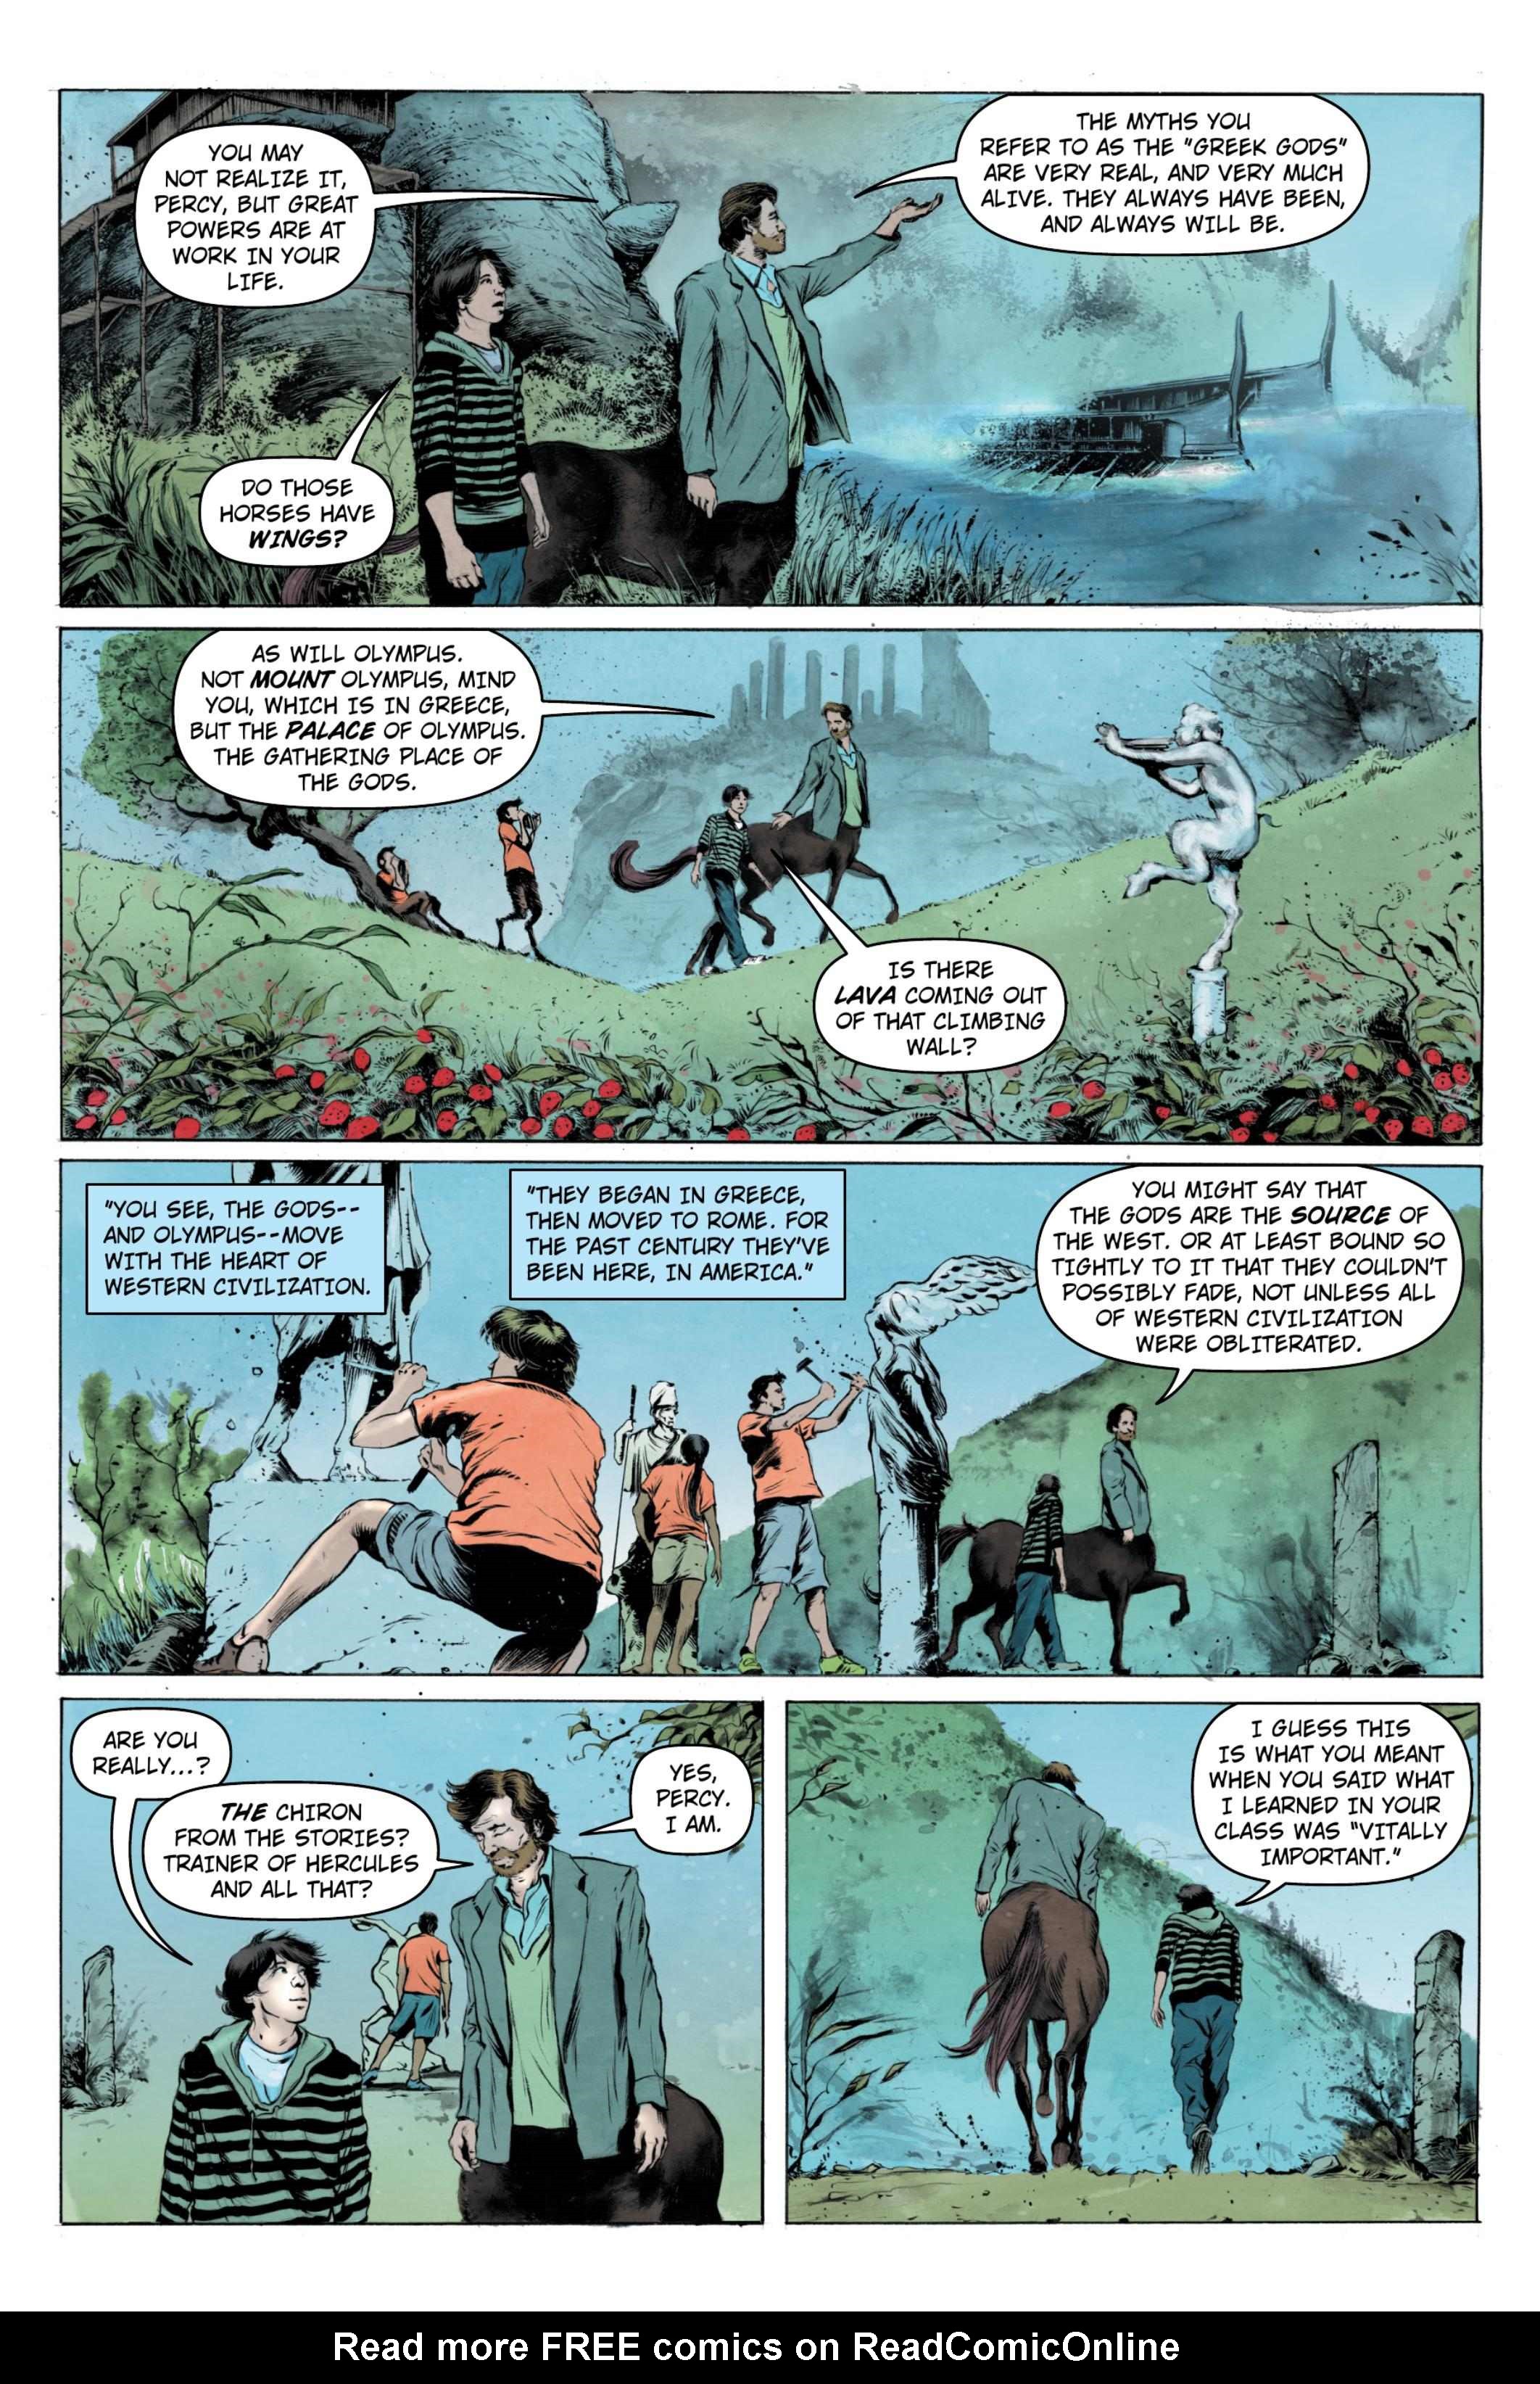 Read online Percy Jackson and the Olympians comic -  Issue # TBP 1 - 33